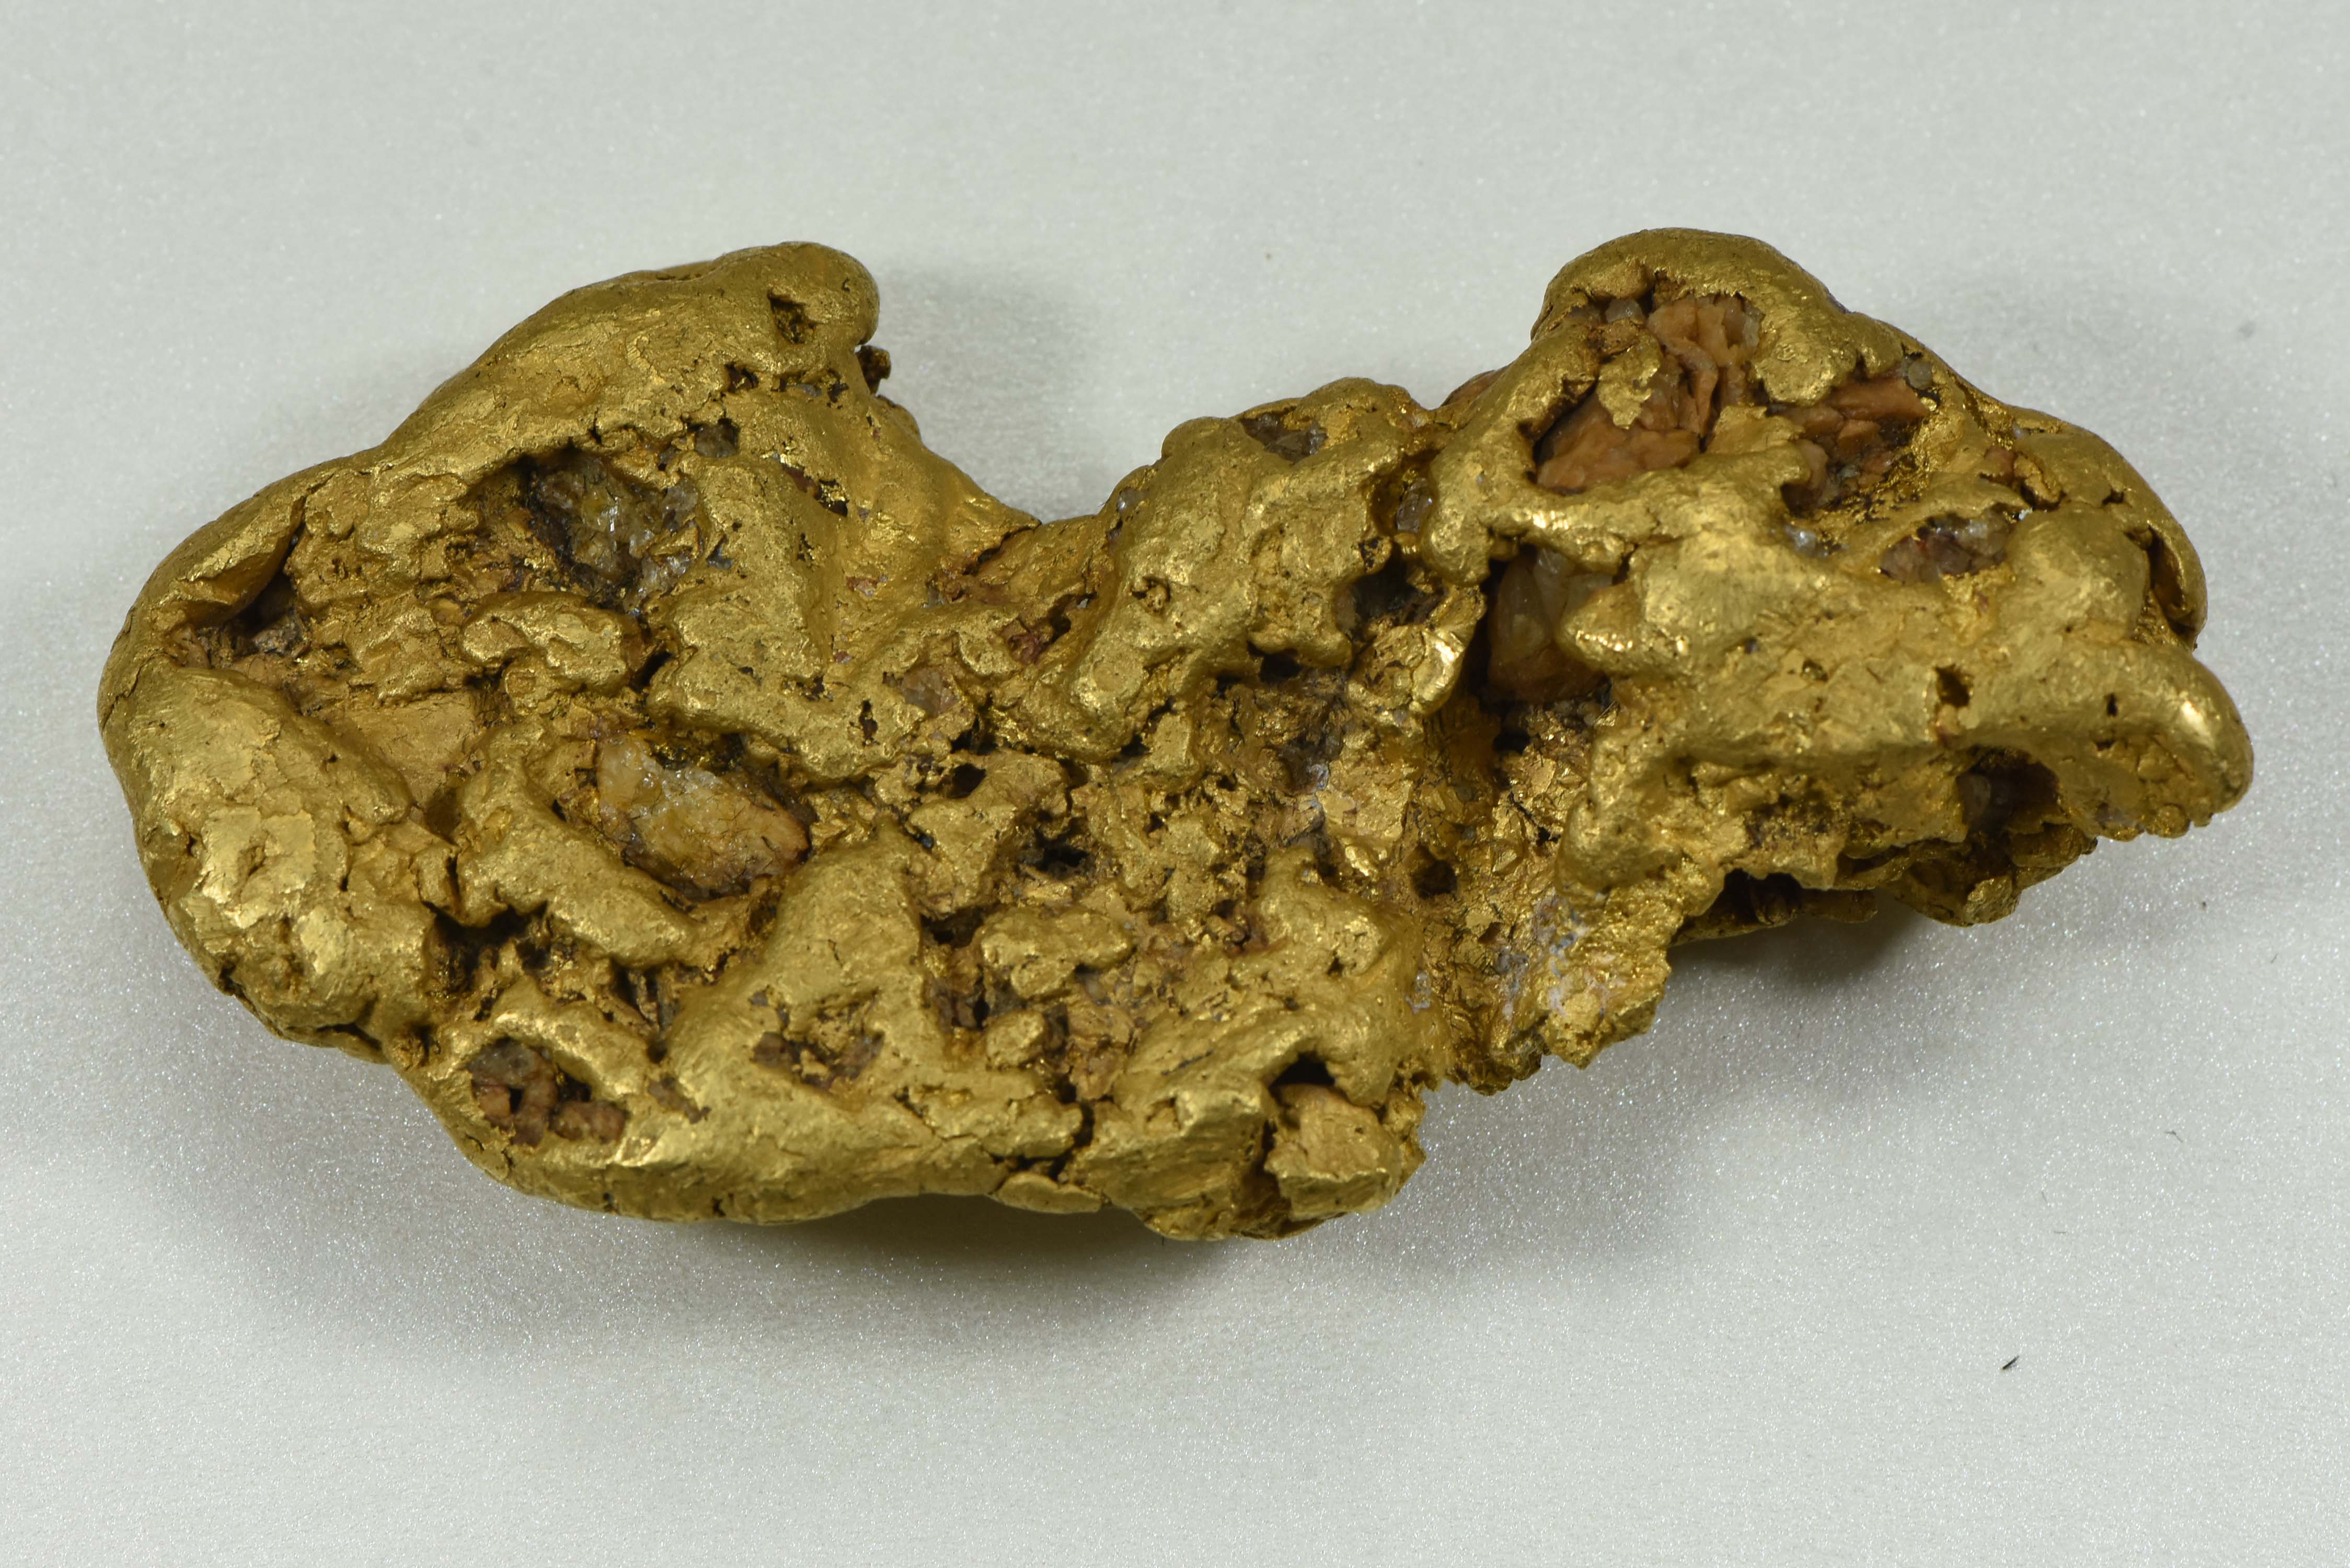 Large Alaskan Natural Gold Nugget 249.22 Grams Genuine 8.01 Troy Ounces 98.46% Pure